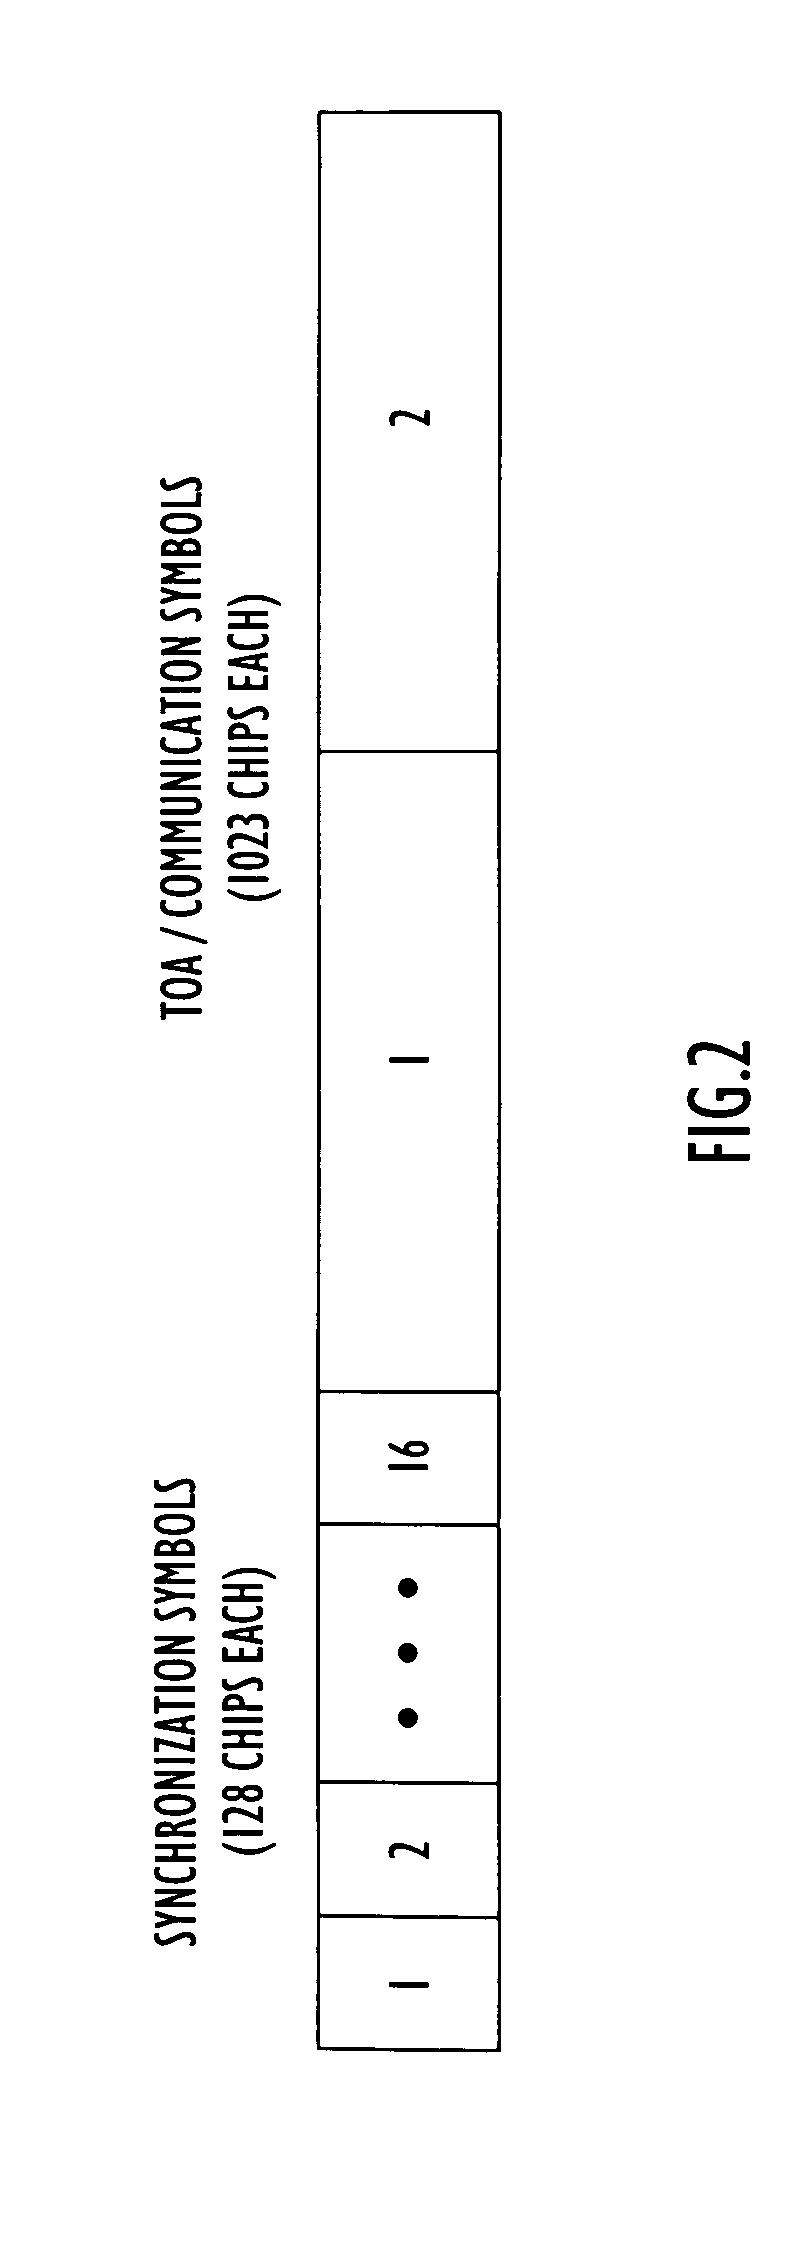 Methods and apparatus for encoding information in a signal by spectral notch modulation